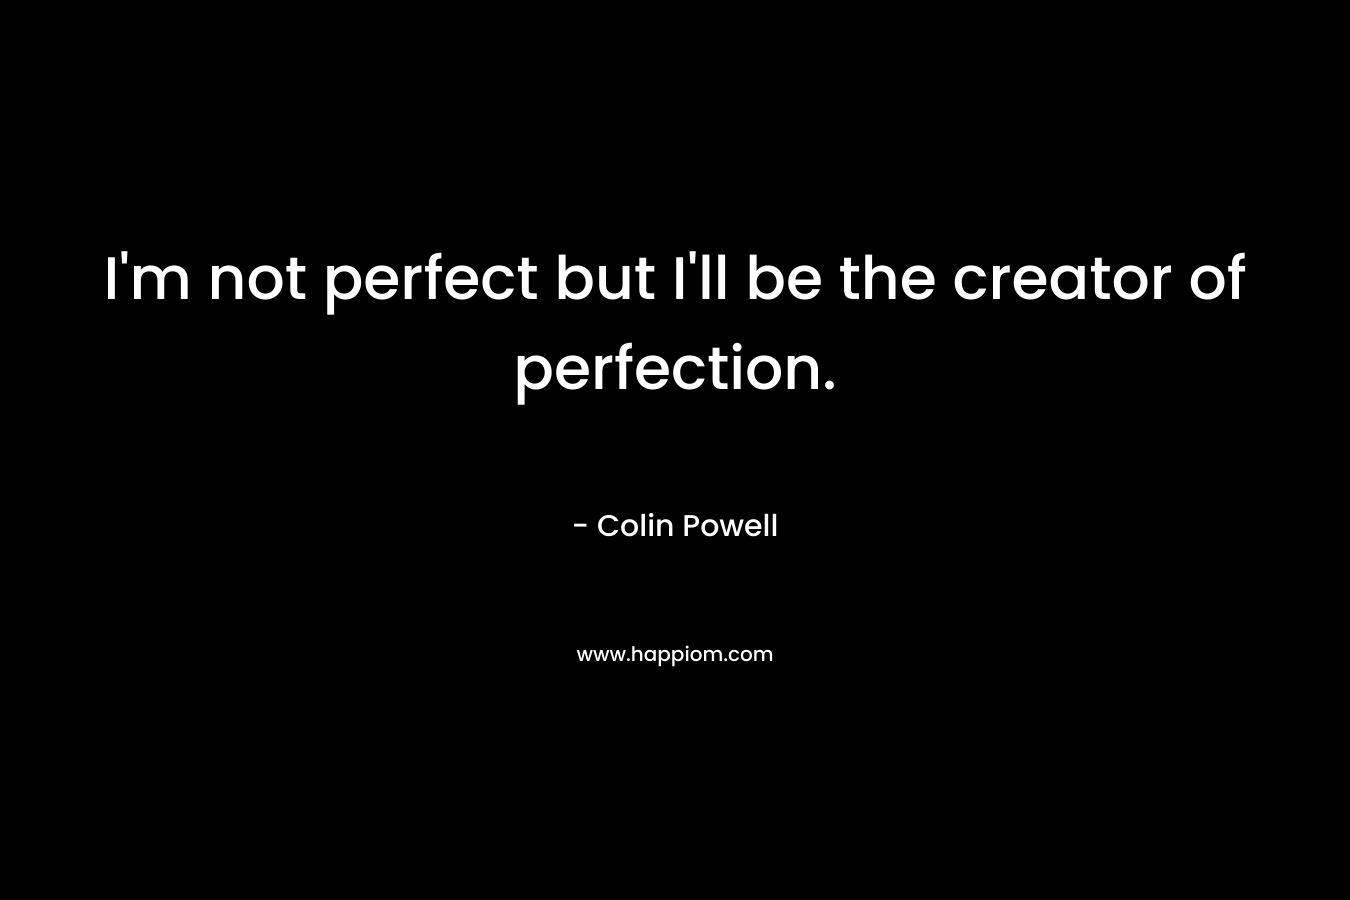 I’m not perfect but I’ll be the creator of perfection. – Colin Powell